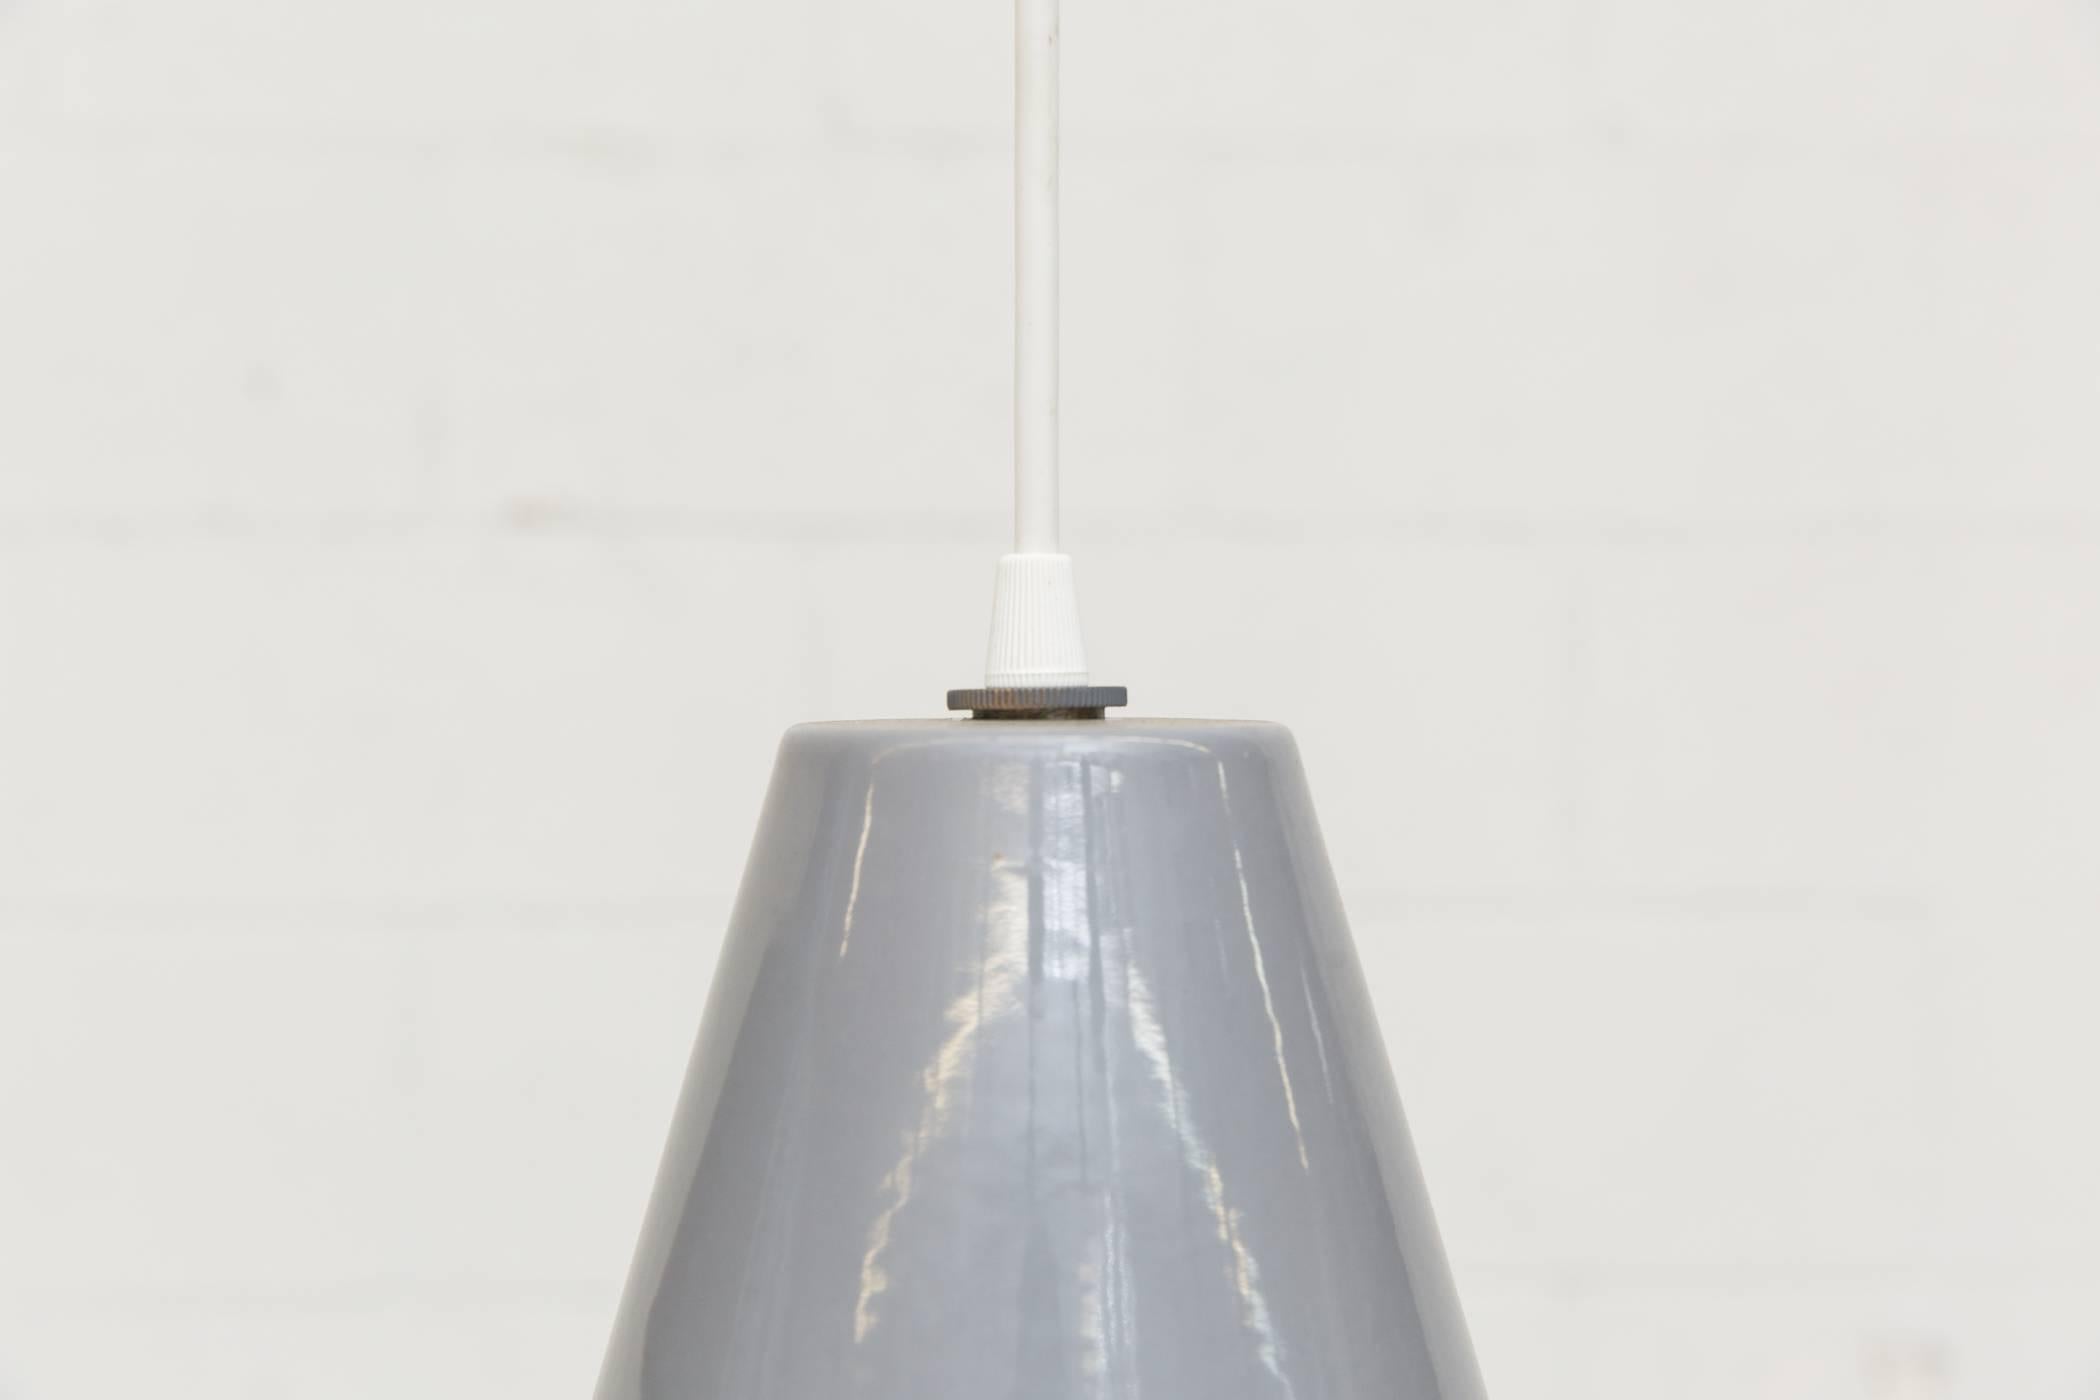 Mid-century, grey enameled metal industrial Dutch factory pendant lamps with white enameled metal interior. Design is similar to the 